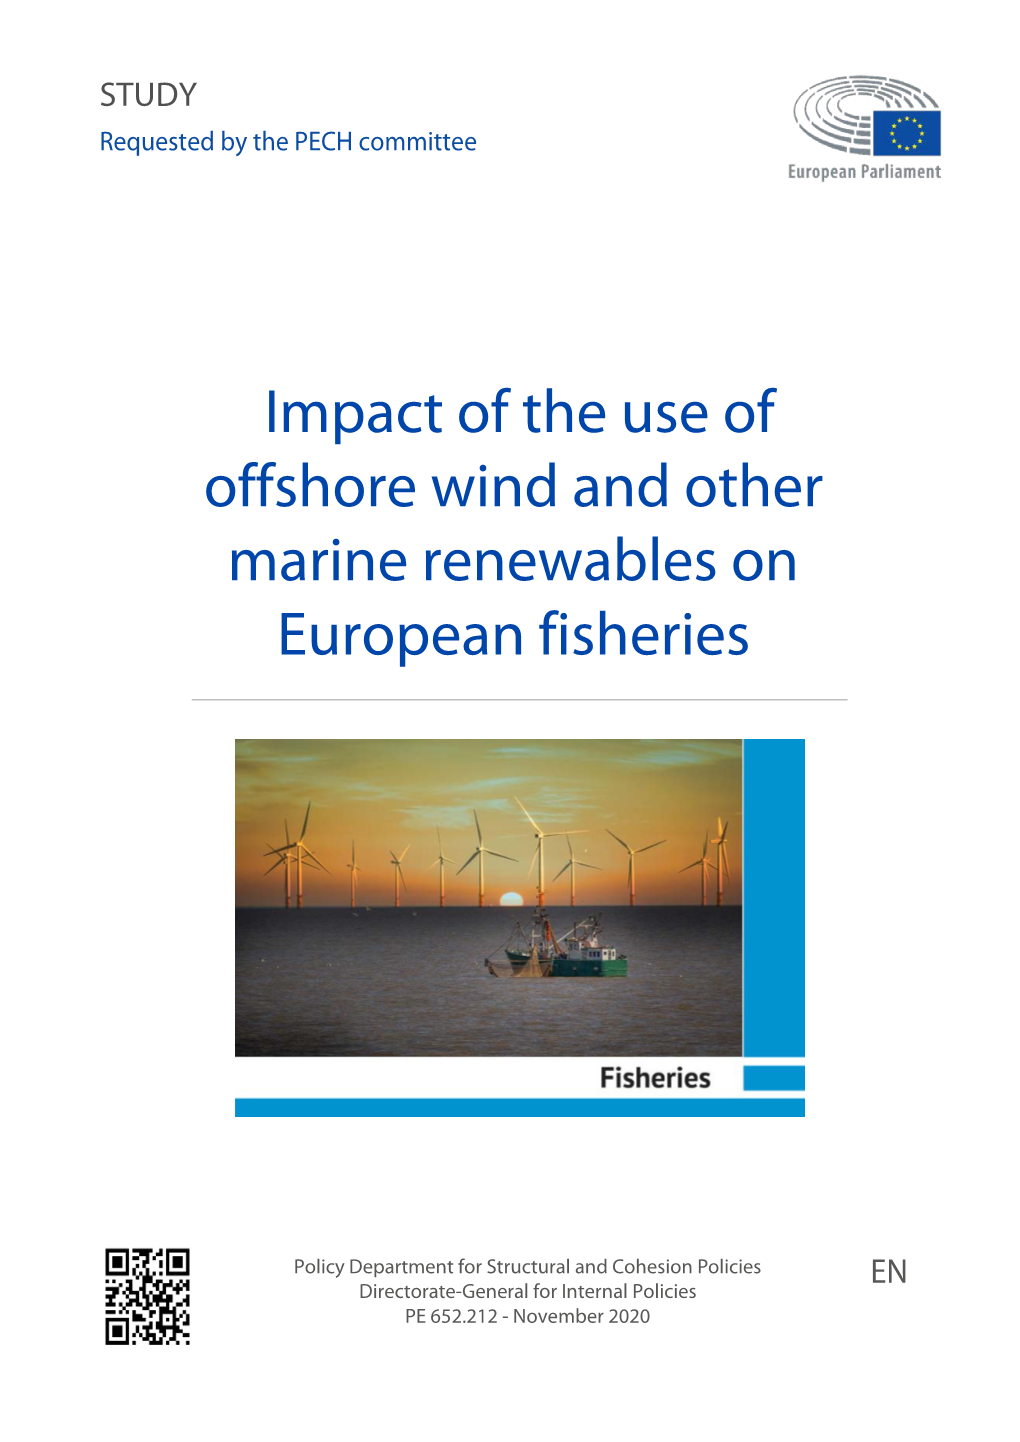 Impact of the Use of Offshore Wind and Other Marine Renewables on European Fisheries